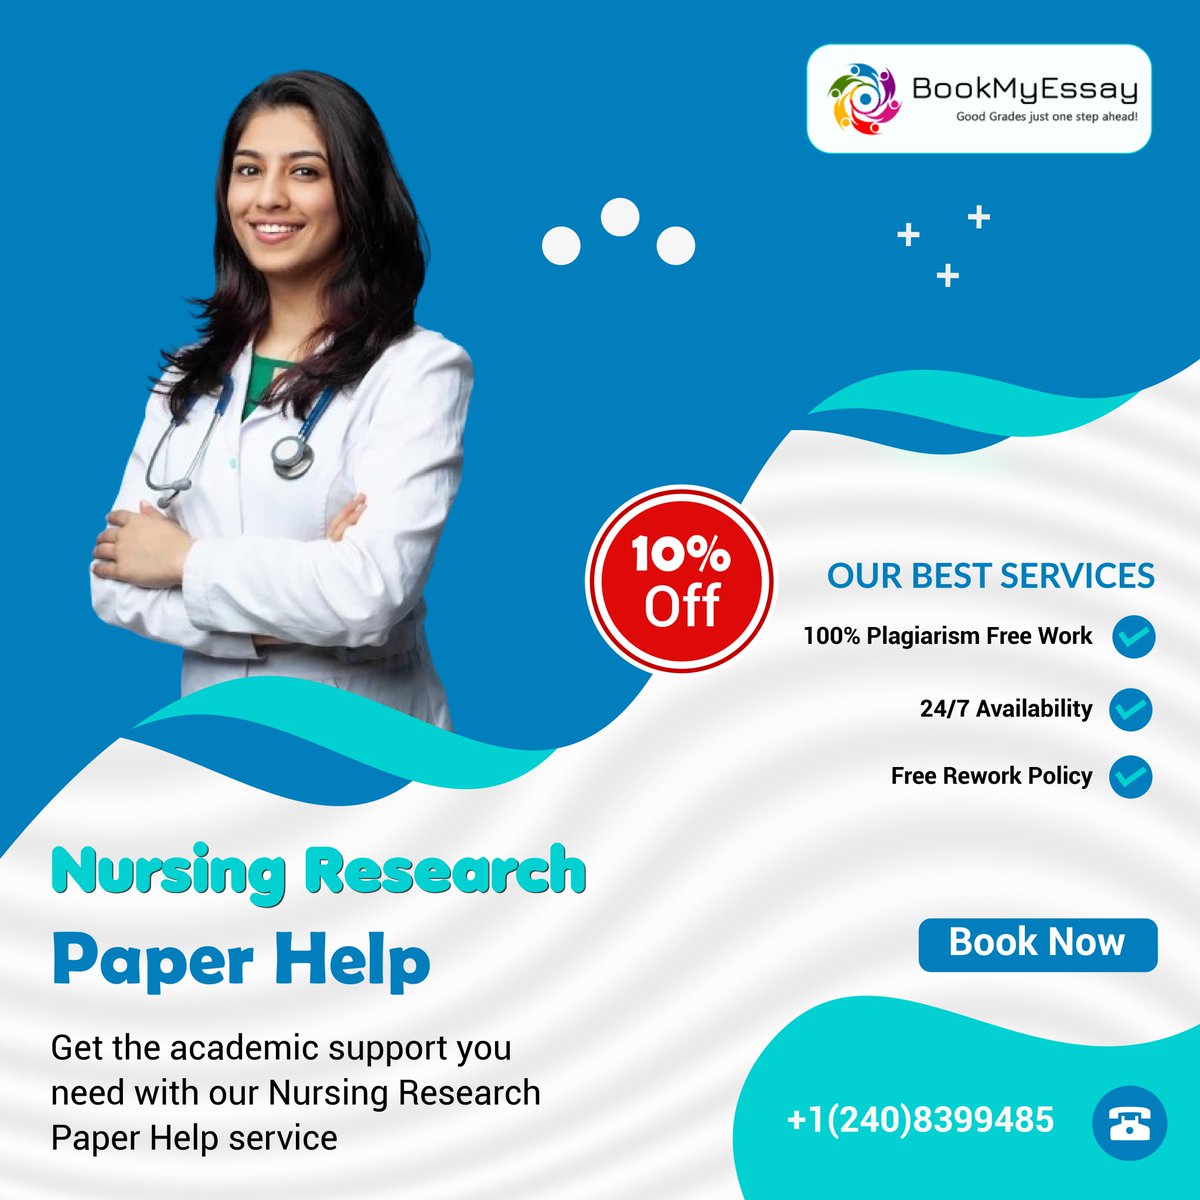 📚 Need a helping hand with your #Nursing  #Researchpaper ? 🩺 Look no further! With @Book_My_Essay by your side, you'll ace those assignments with ease! 

#HealthcareStudies #MedicalResearch #NurseScholarship #PatientCare #ClinicalStudies #ResearchMethods #HealthScience